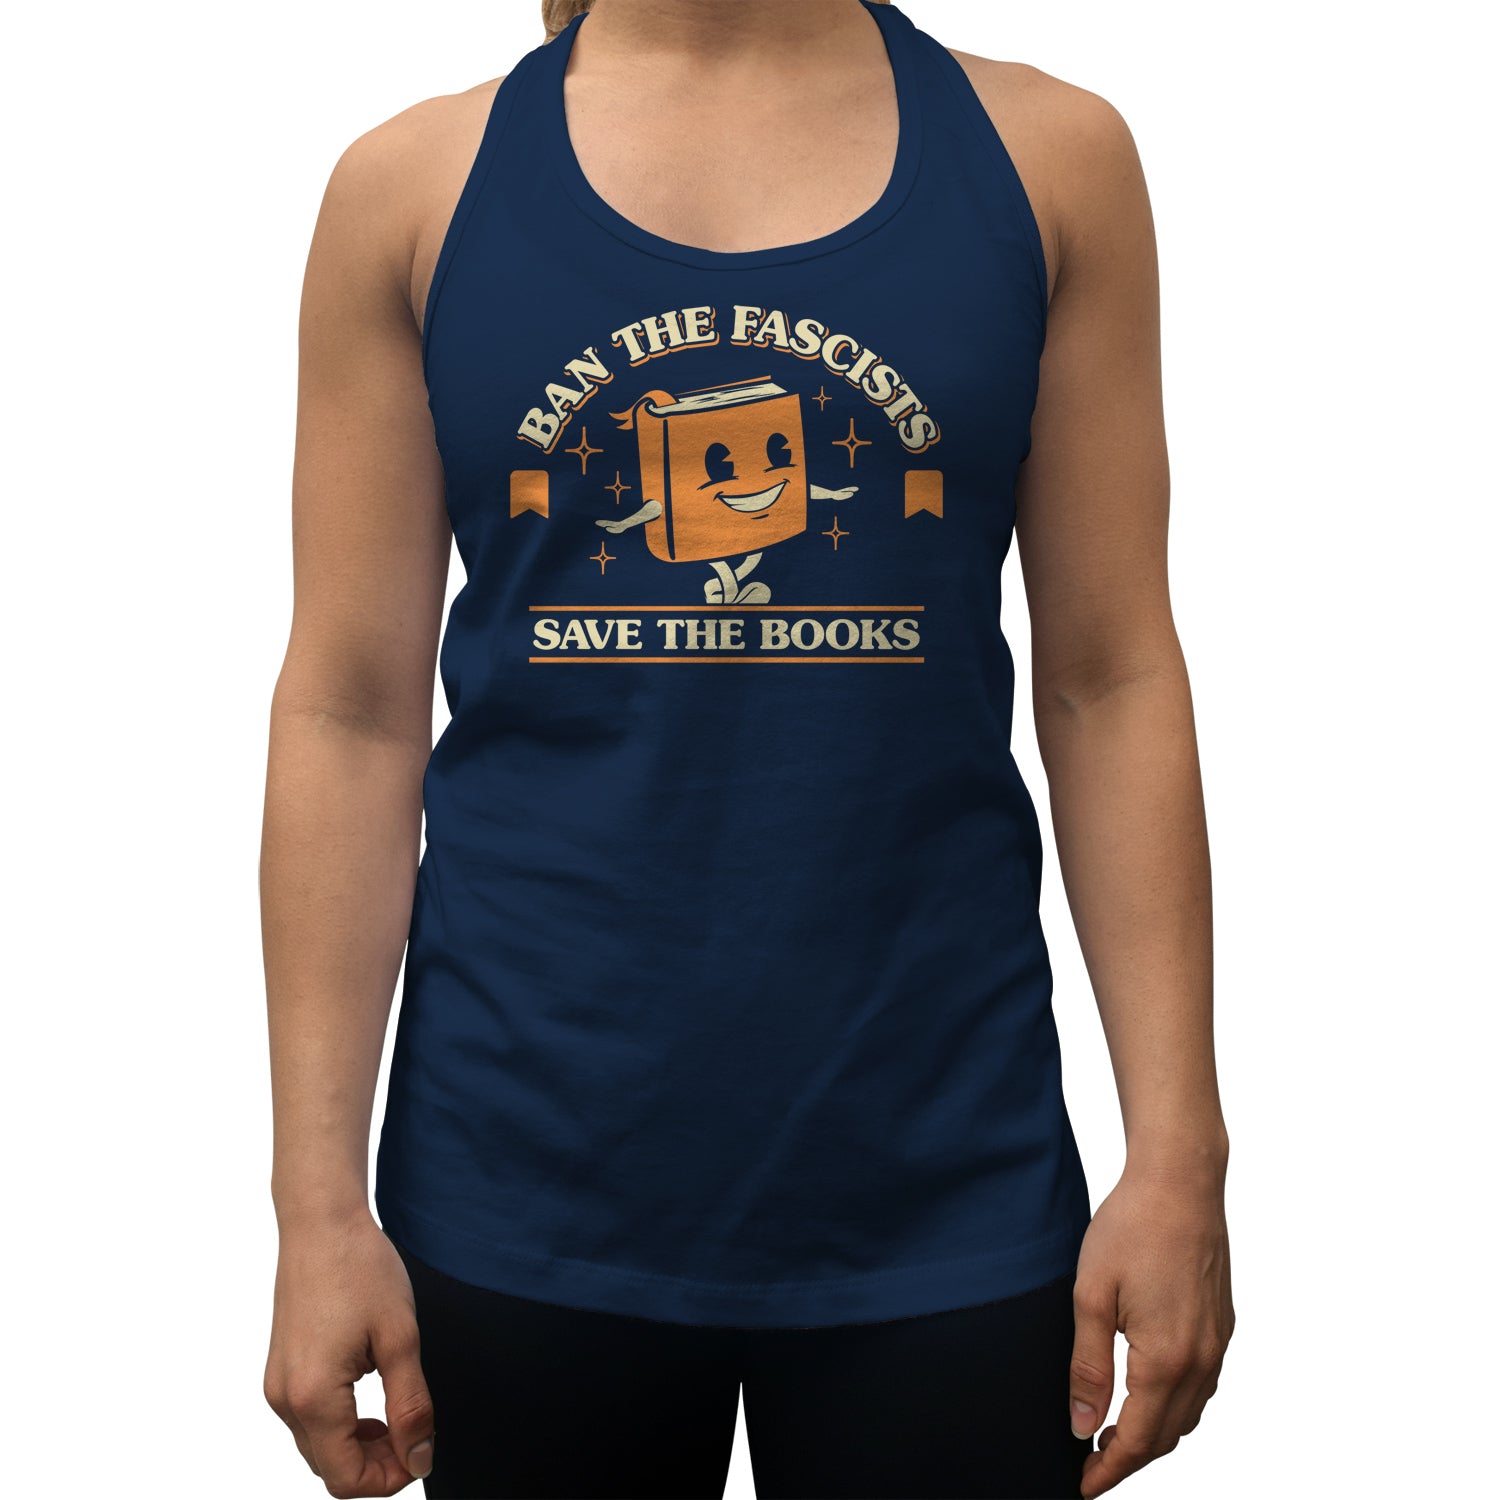 Women's Ban The Fascists Save The Books Racerback Tank Top